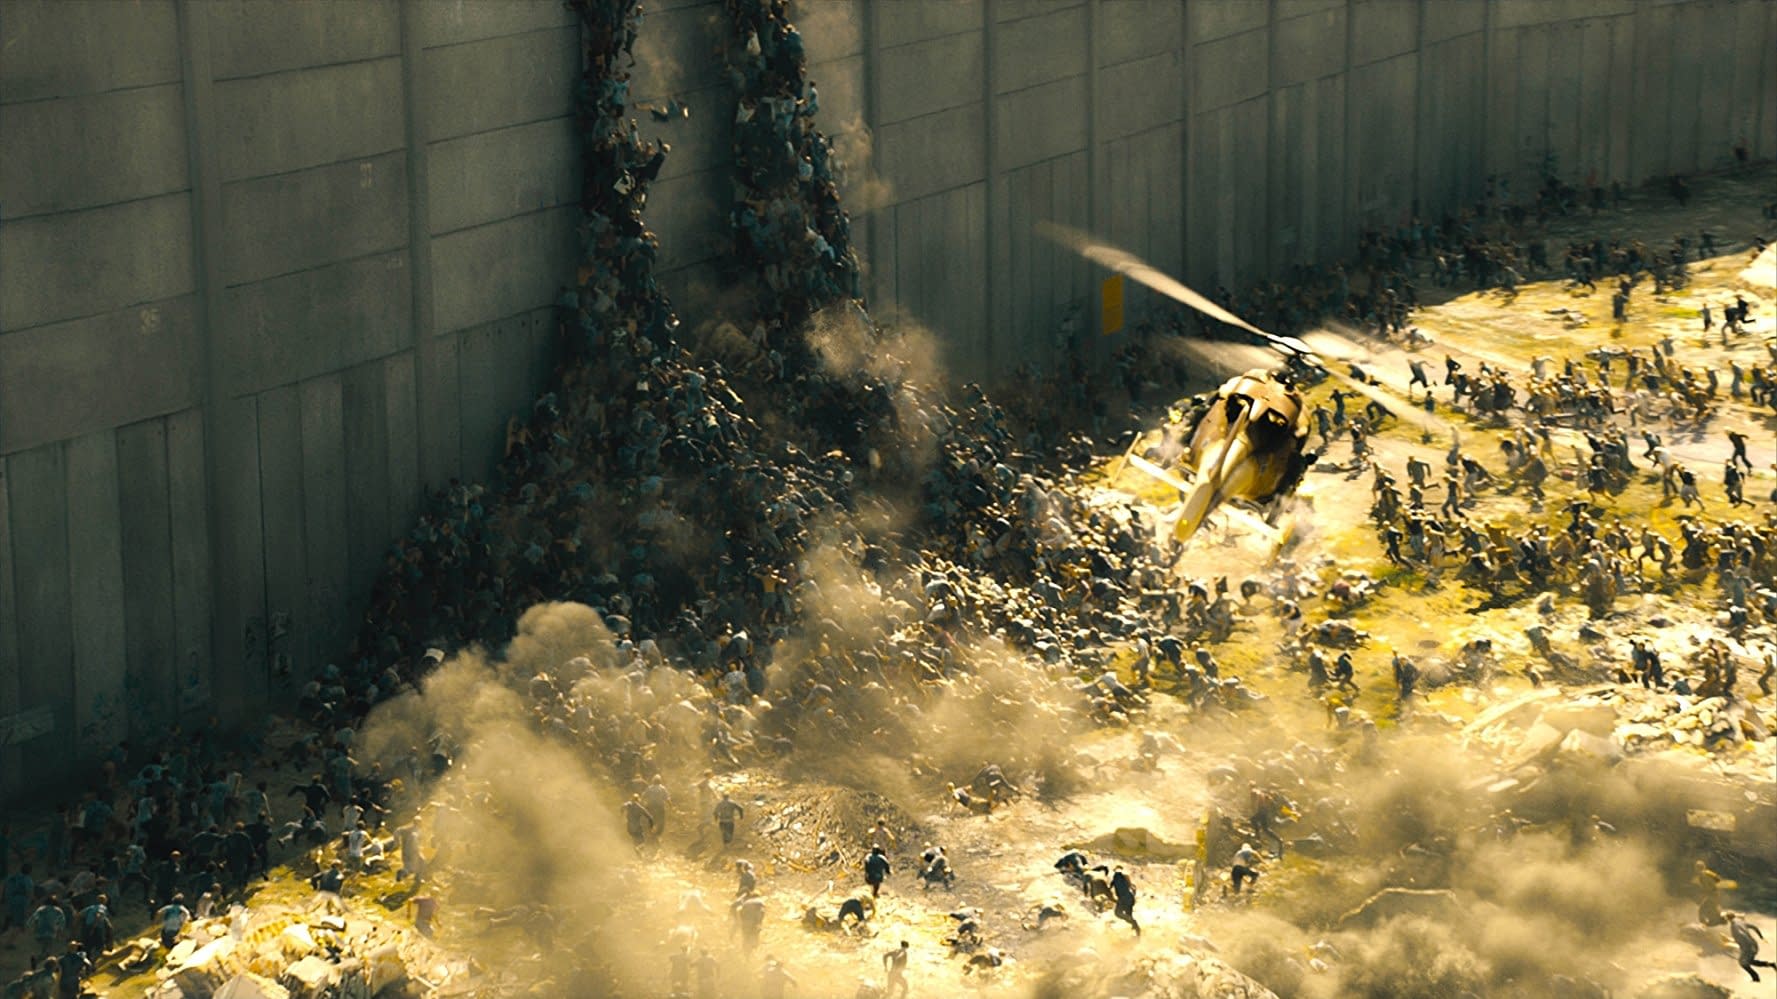 [RUMOR] World War Z 2 Production Has Been Pushed Back